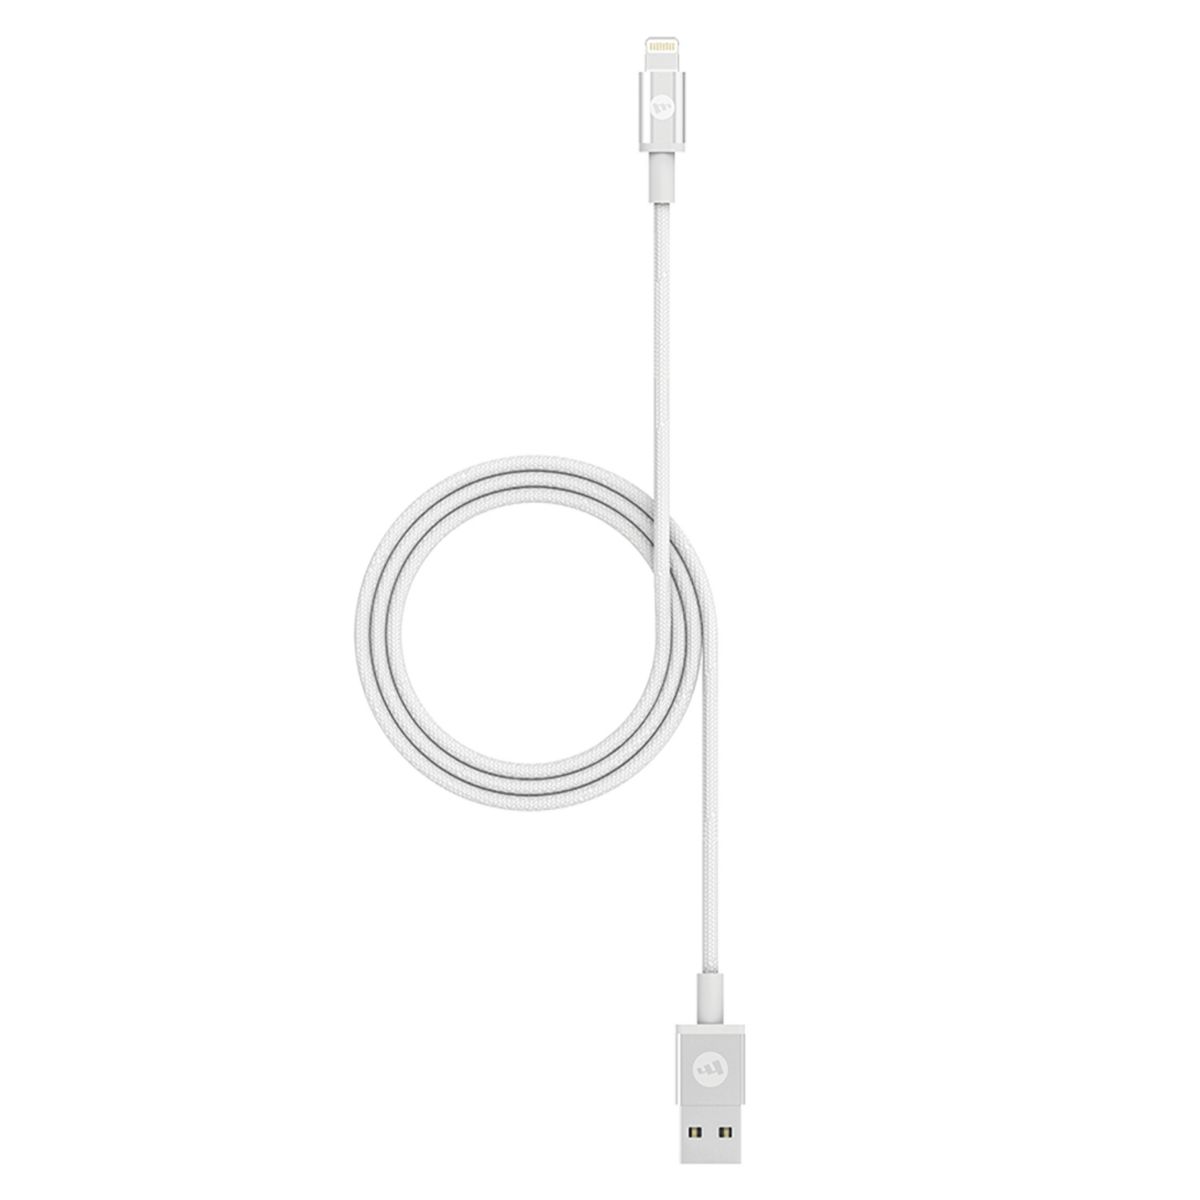 Mophie Type A To Lightning Cable 3 фута. Mophie